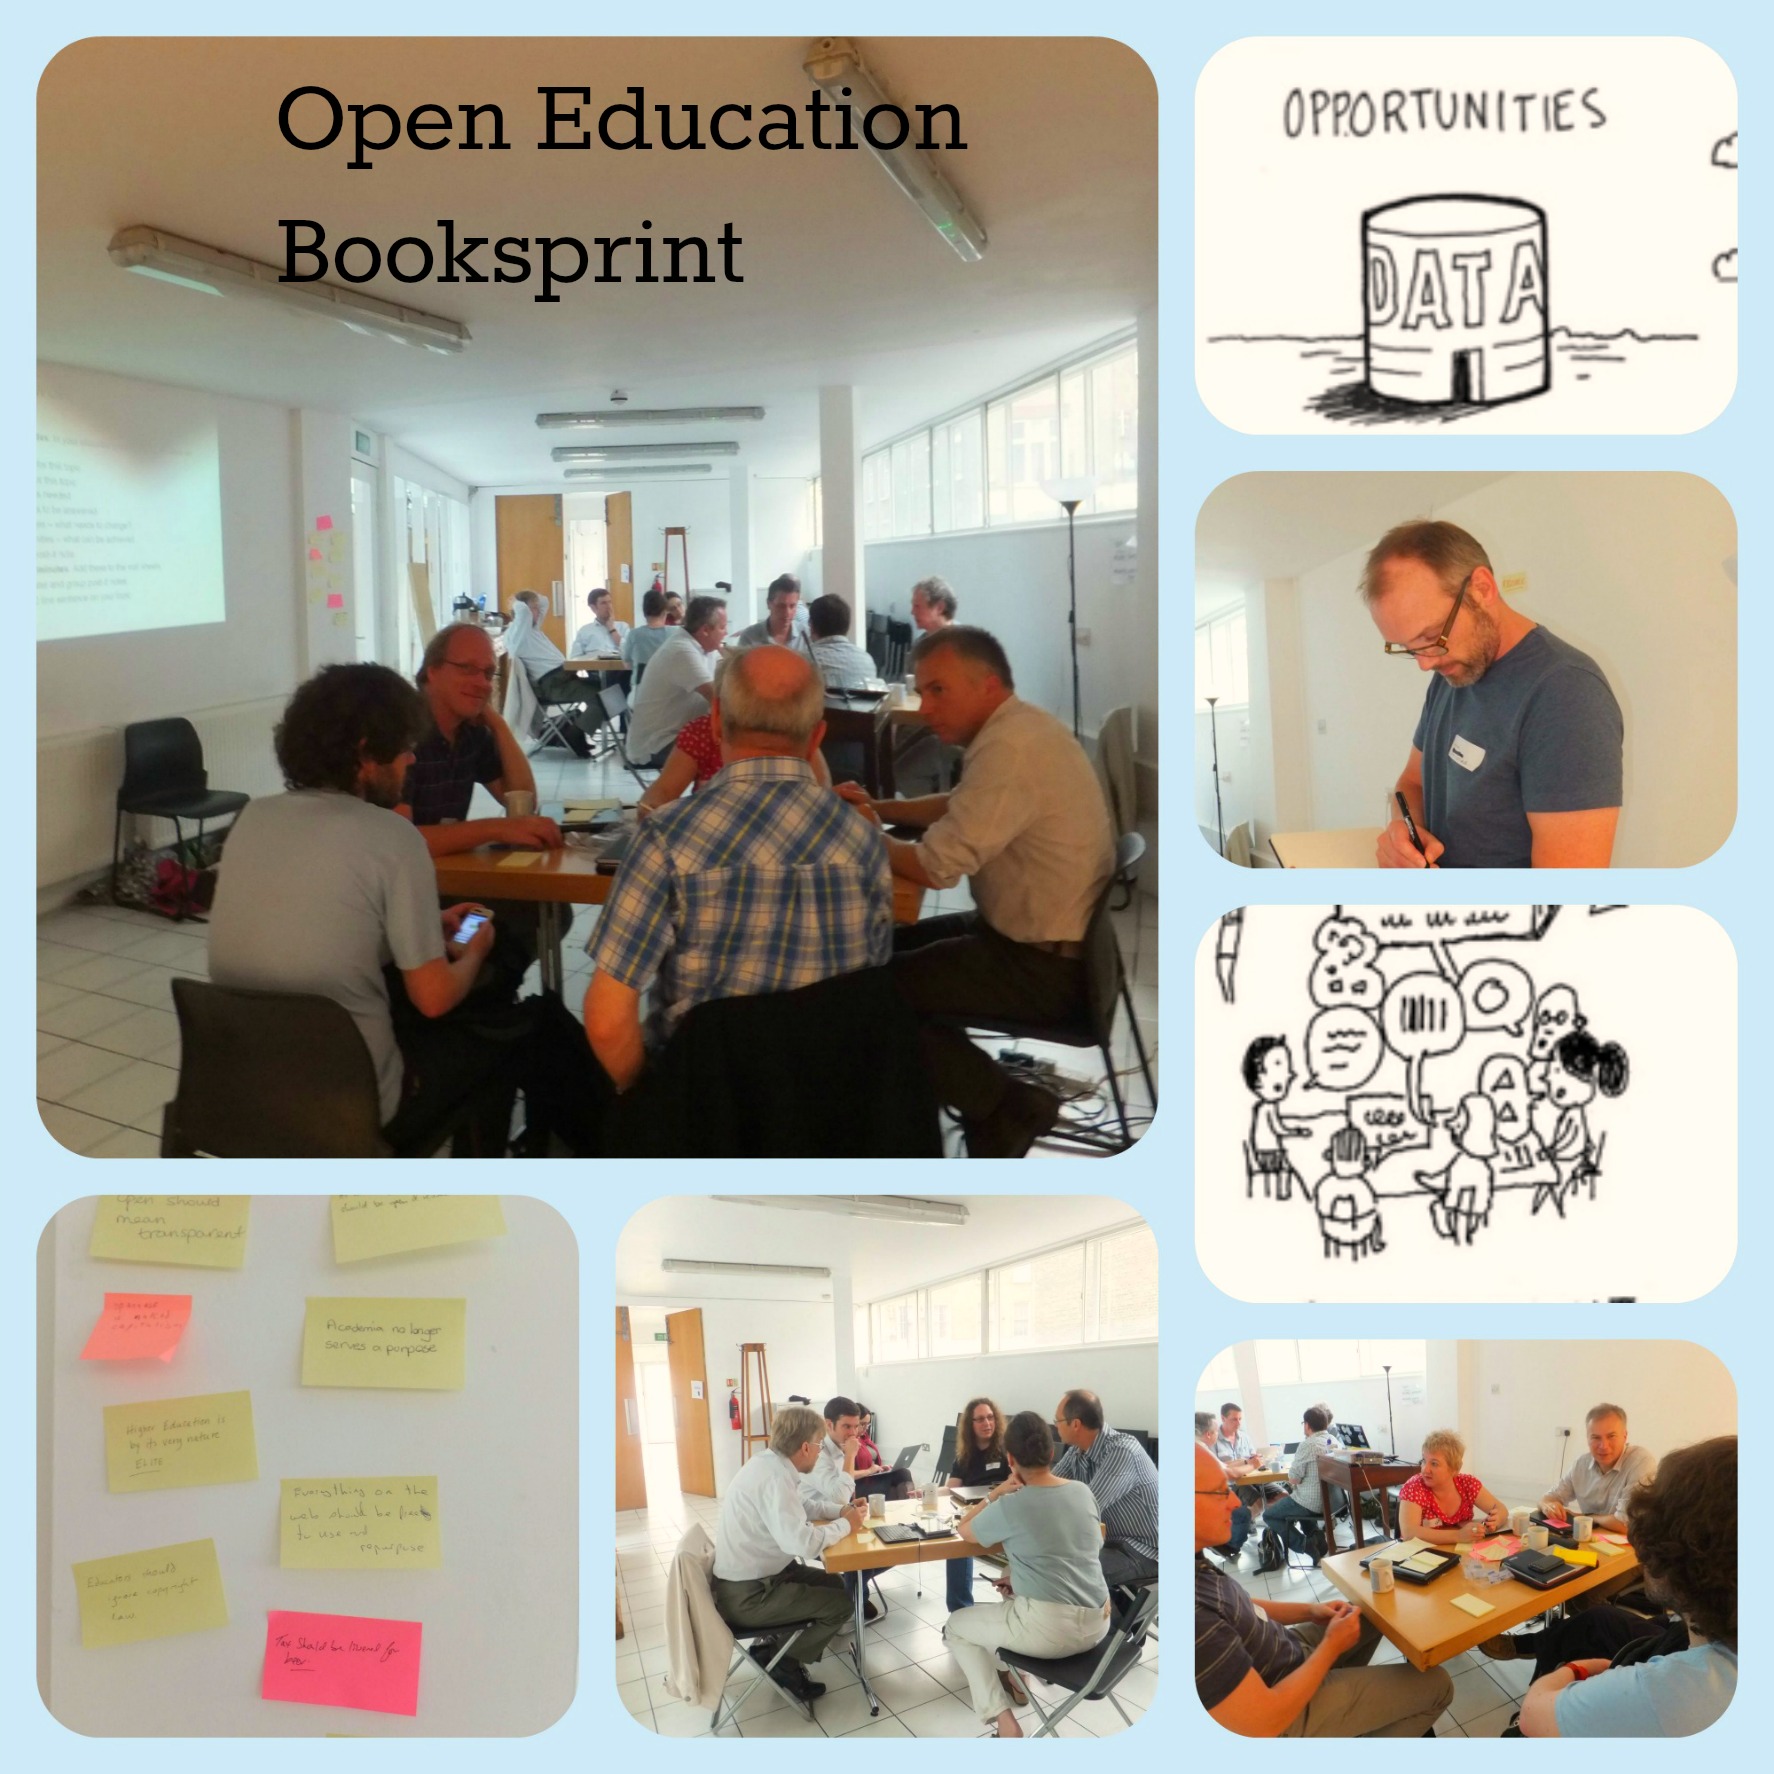 Figure 6: Images from the Open Education Handbook booksprint